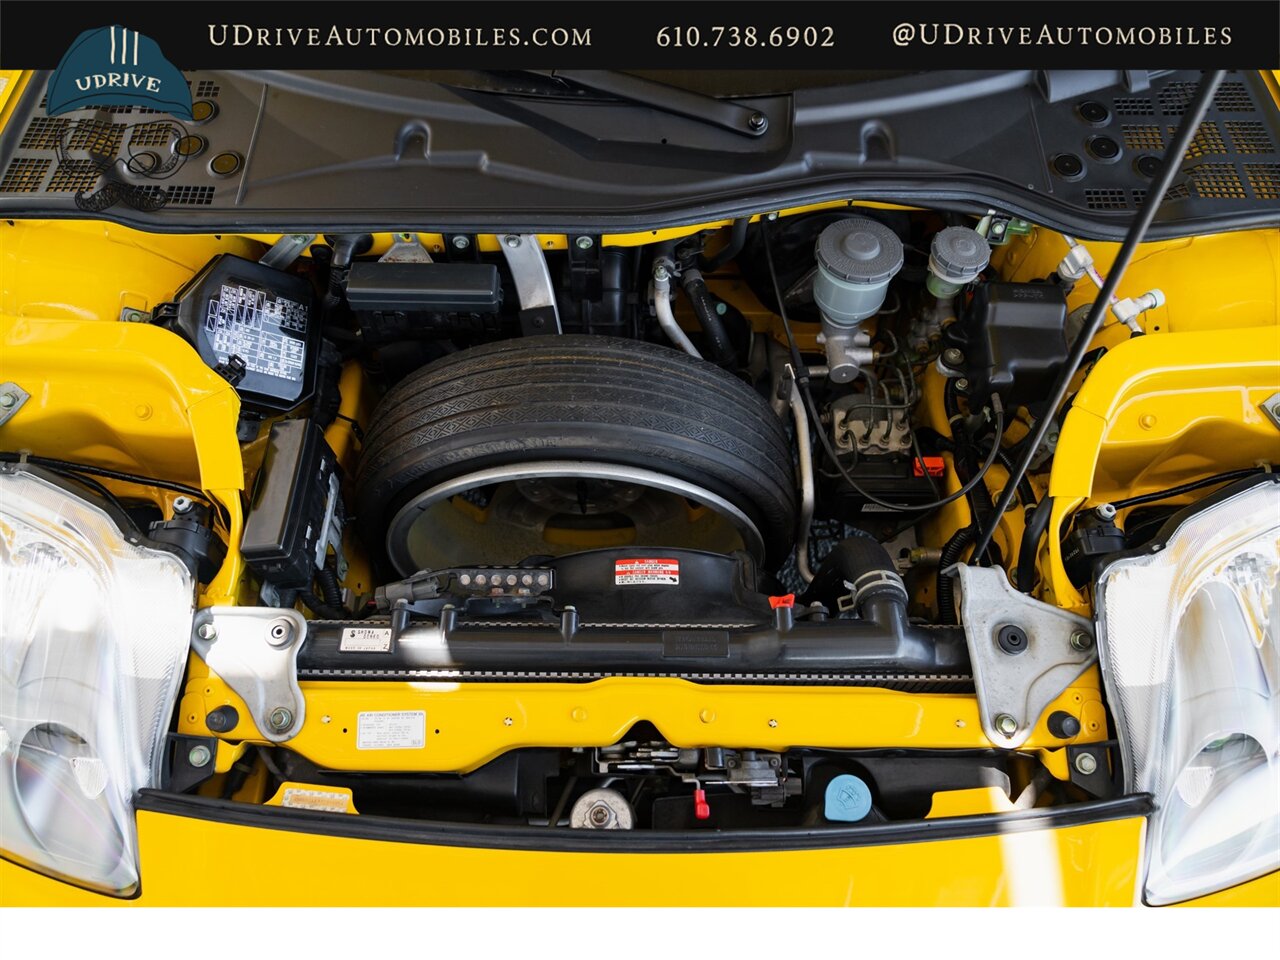 2003 Acura NSX NSX-T  Spa Yellow over Yellow Lthr 1 of 13 Produced - Photo 47 - West Chester, PA 19382